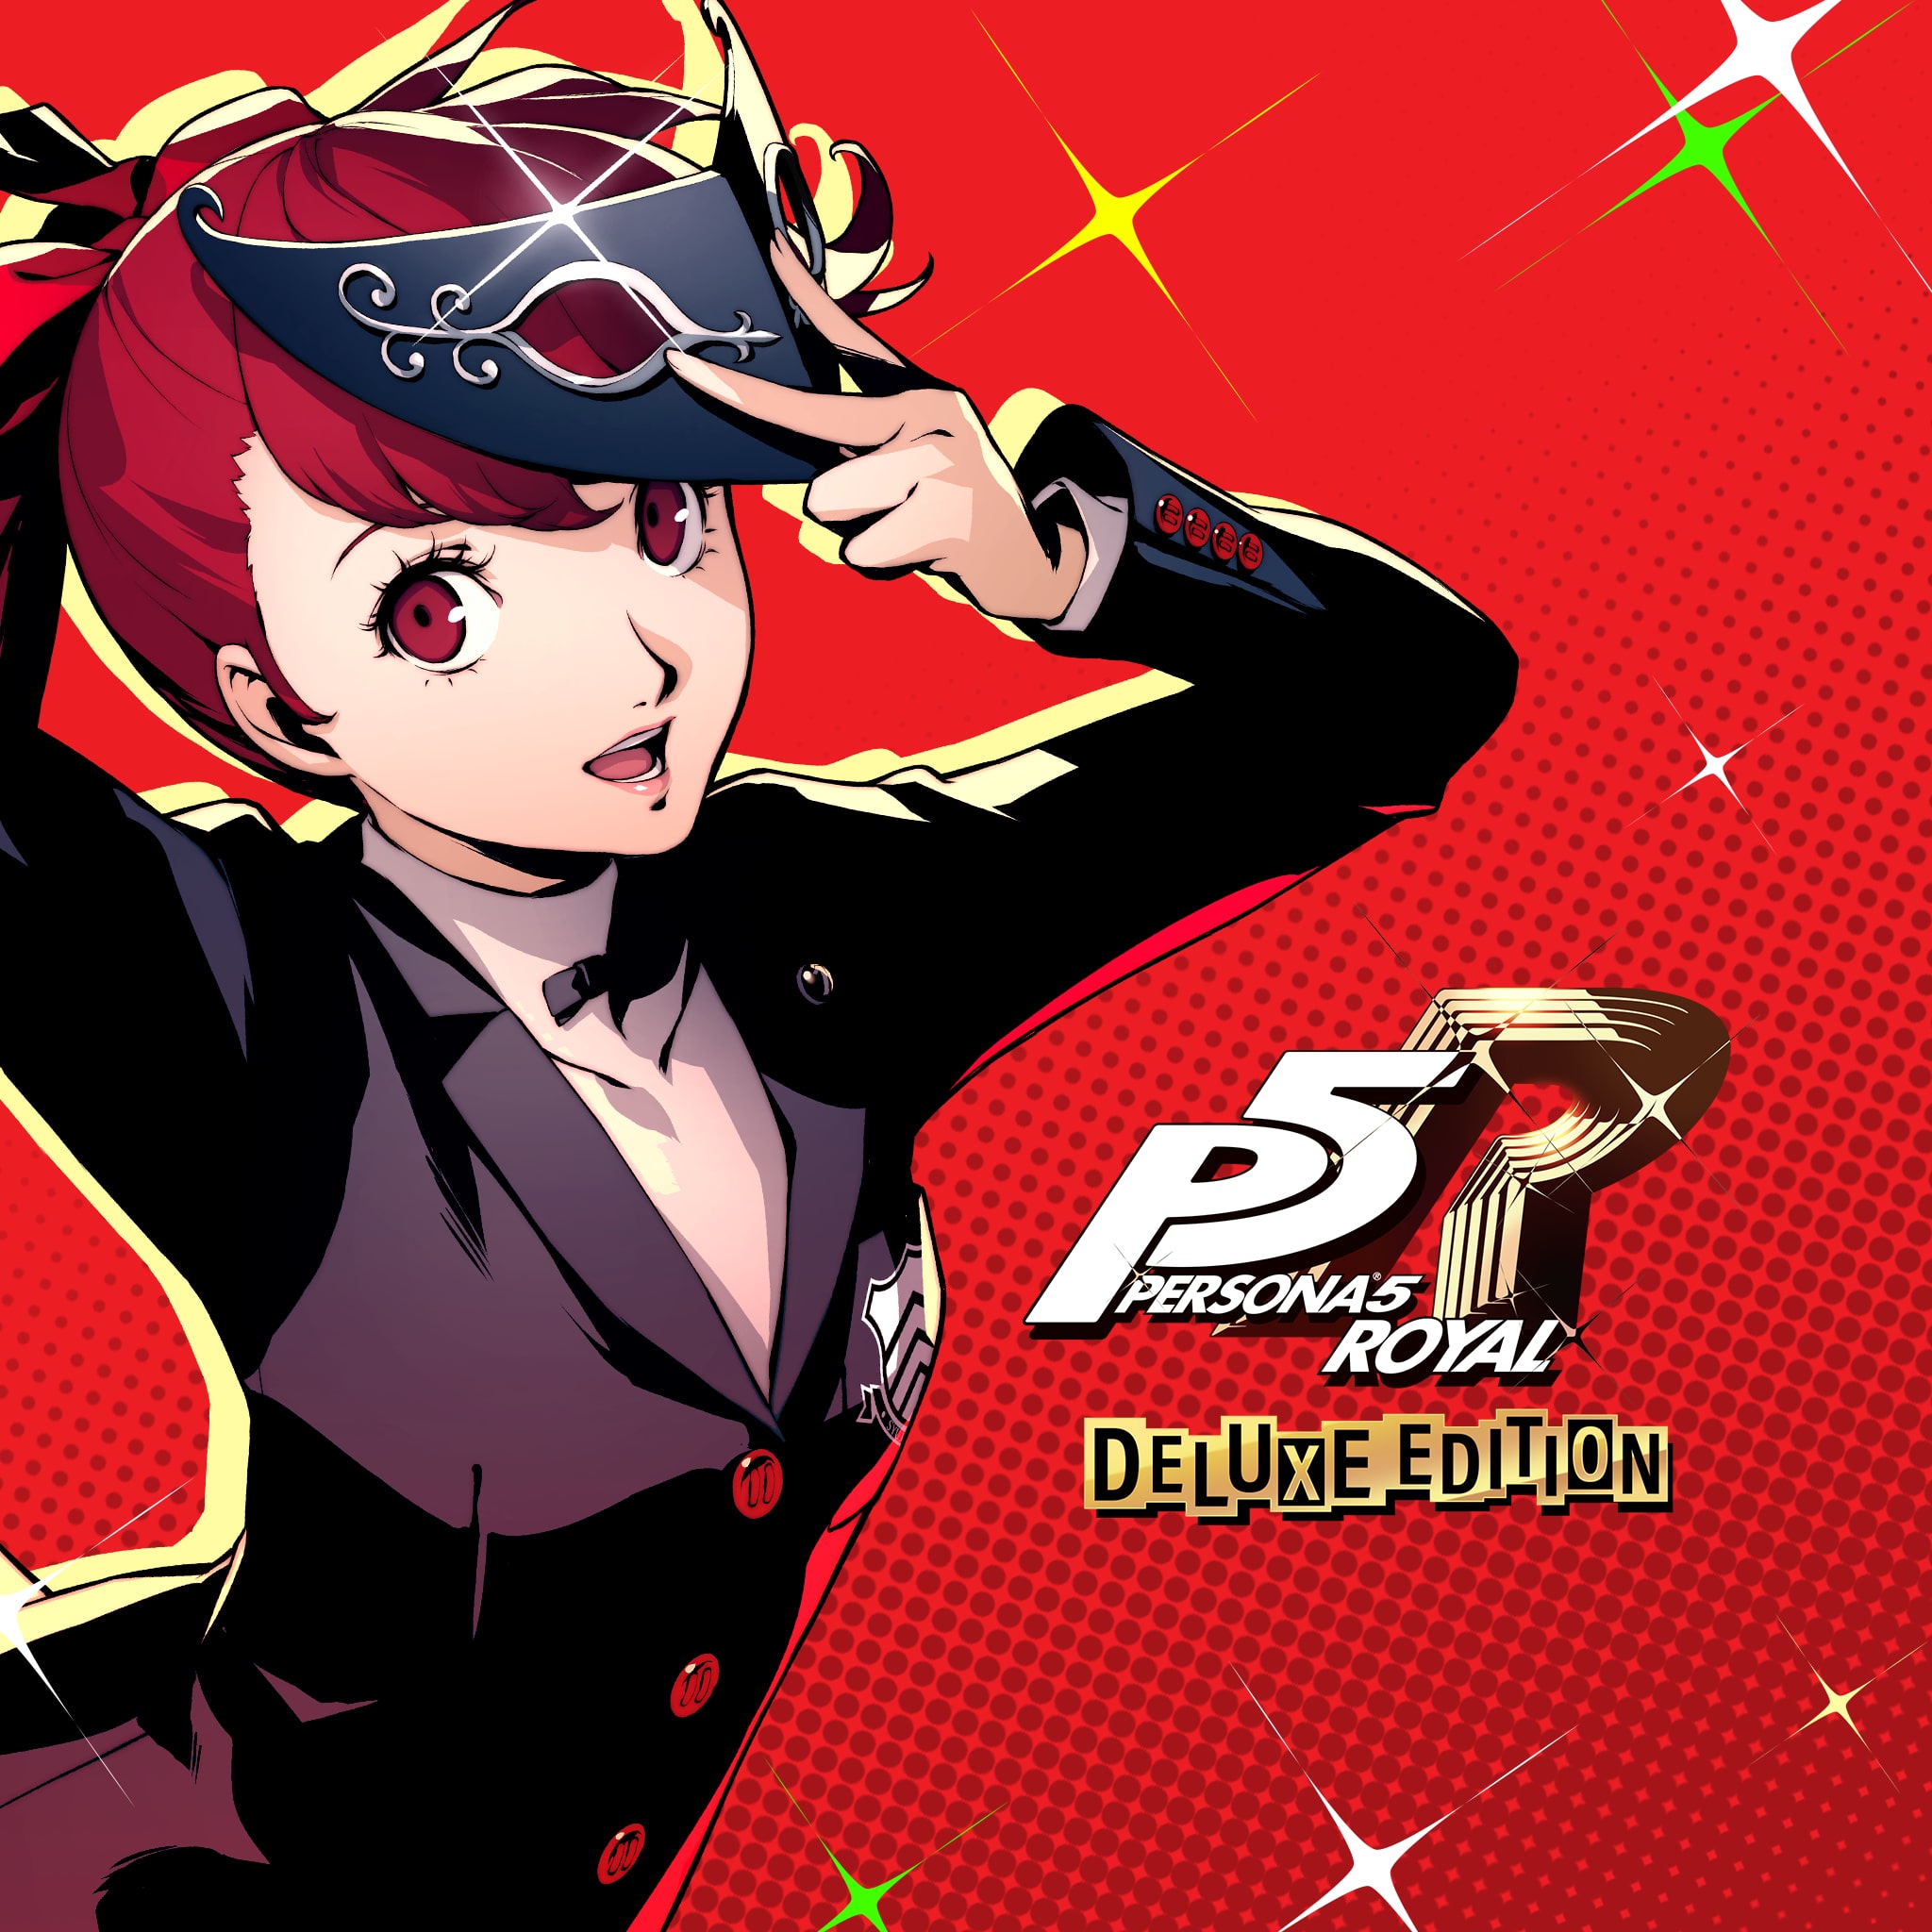 Persona®5 Royal Deluxe Edition